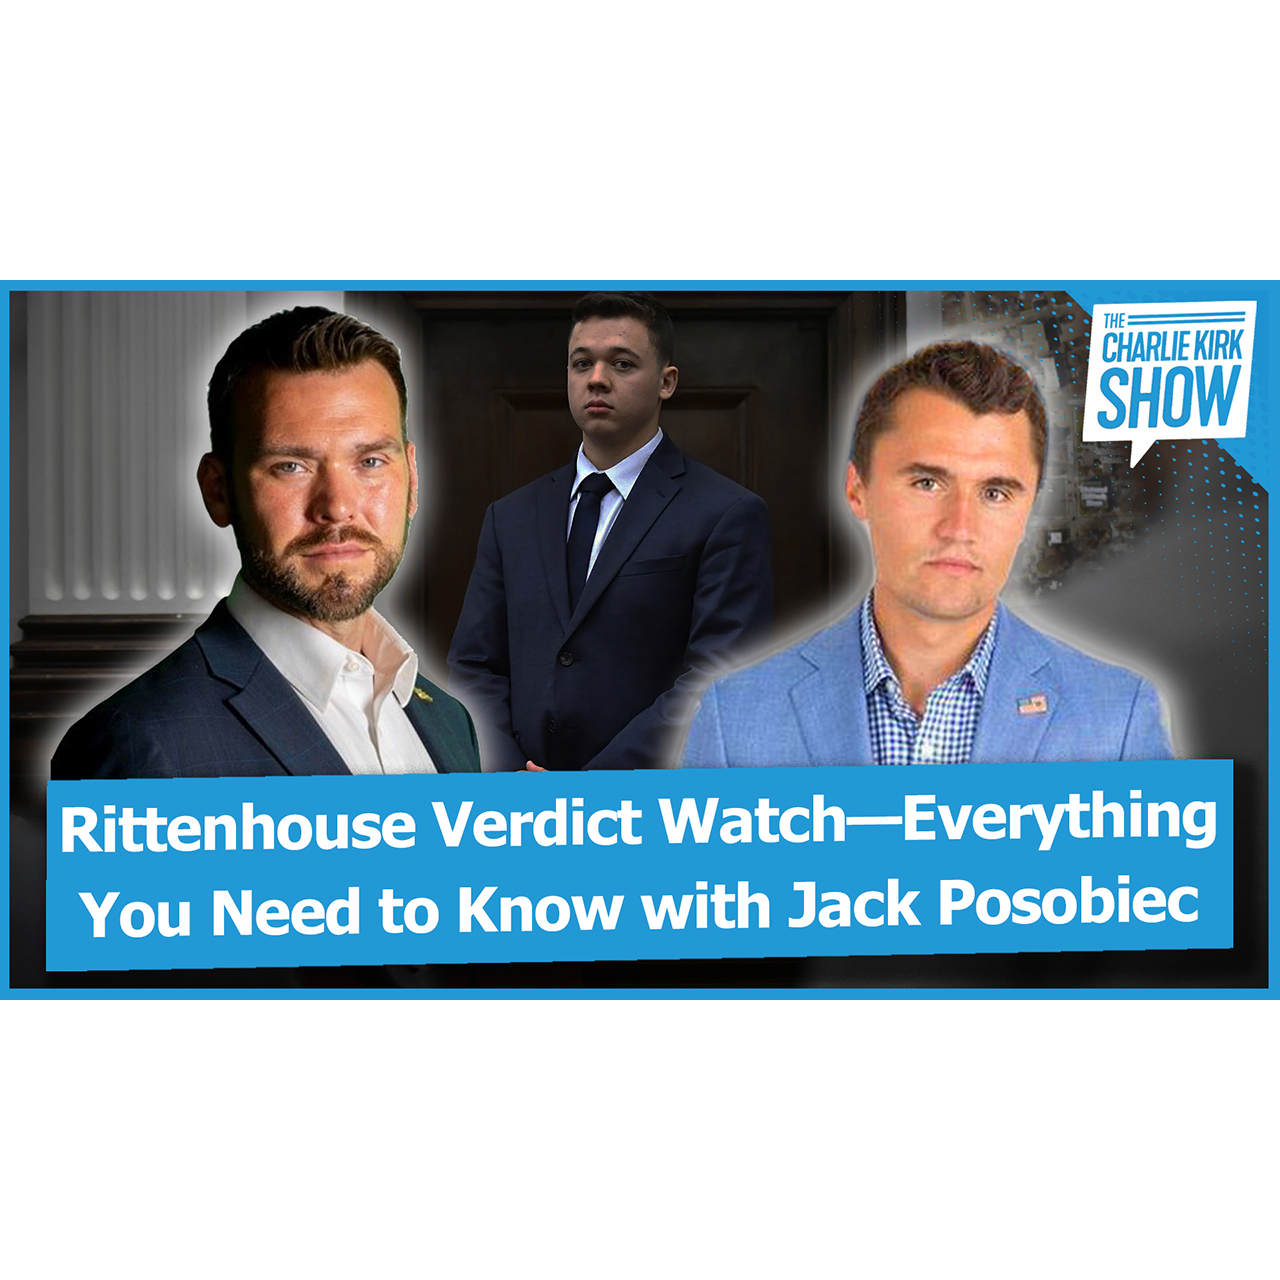 Rittenhouse Verdict Watch—Everything You Need to Know with Jack Posobiec